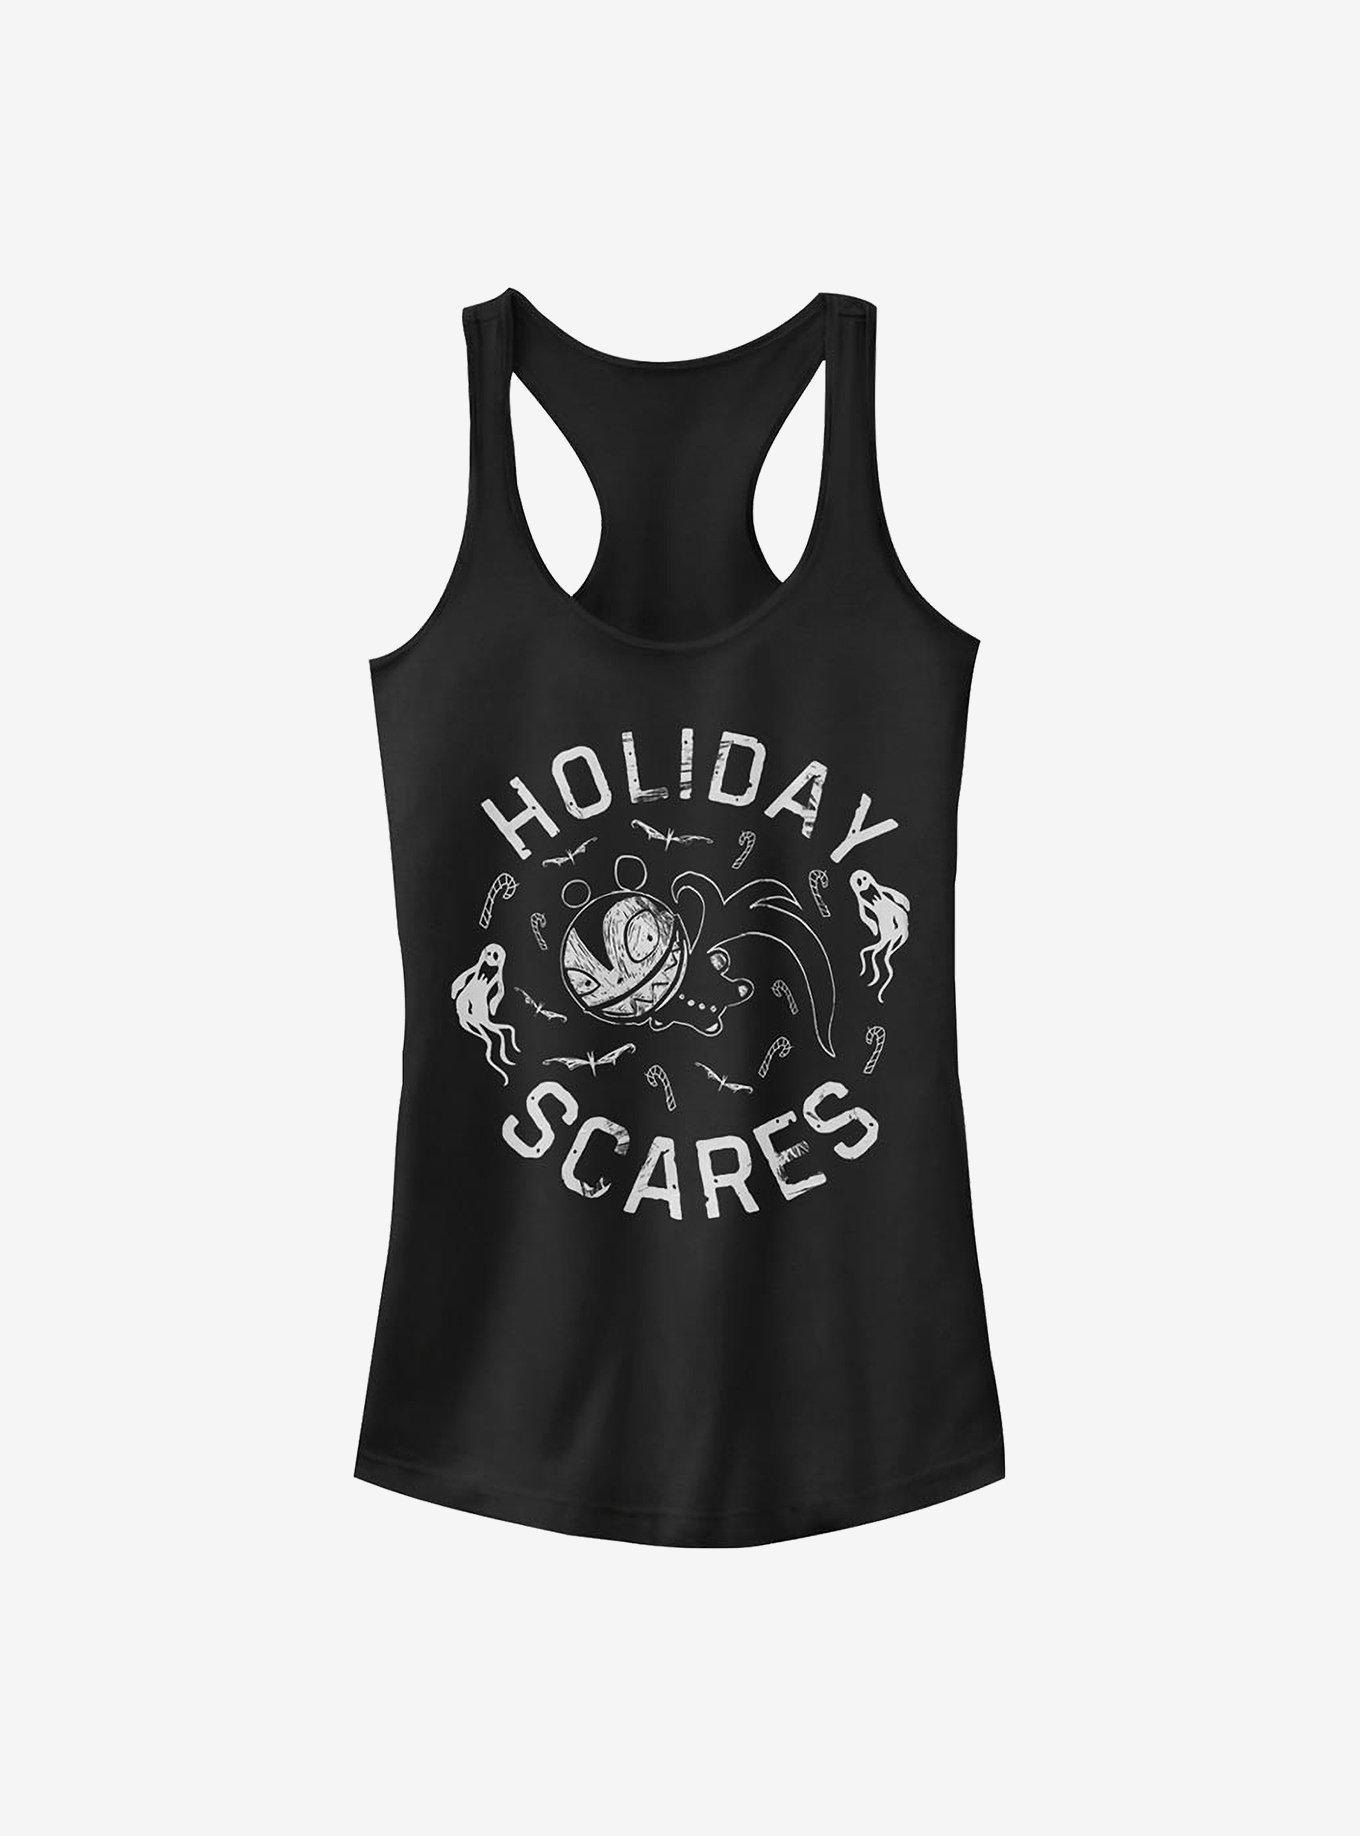 The Nightmare Before Christmas Holiday Scares Doll Girls Tank Top, BLACK, hi-res